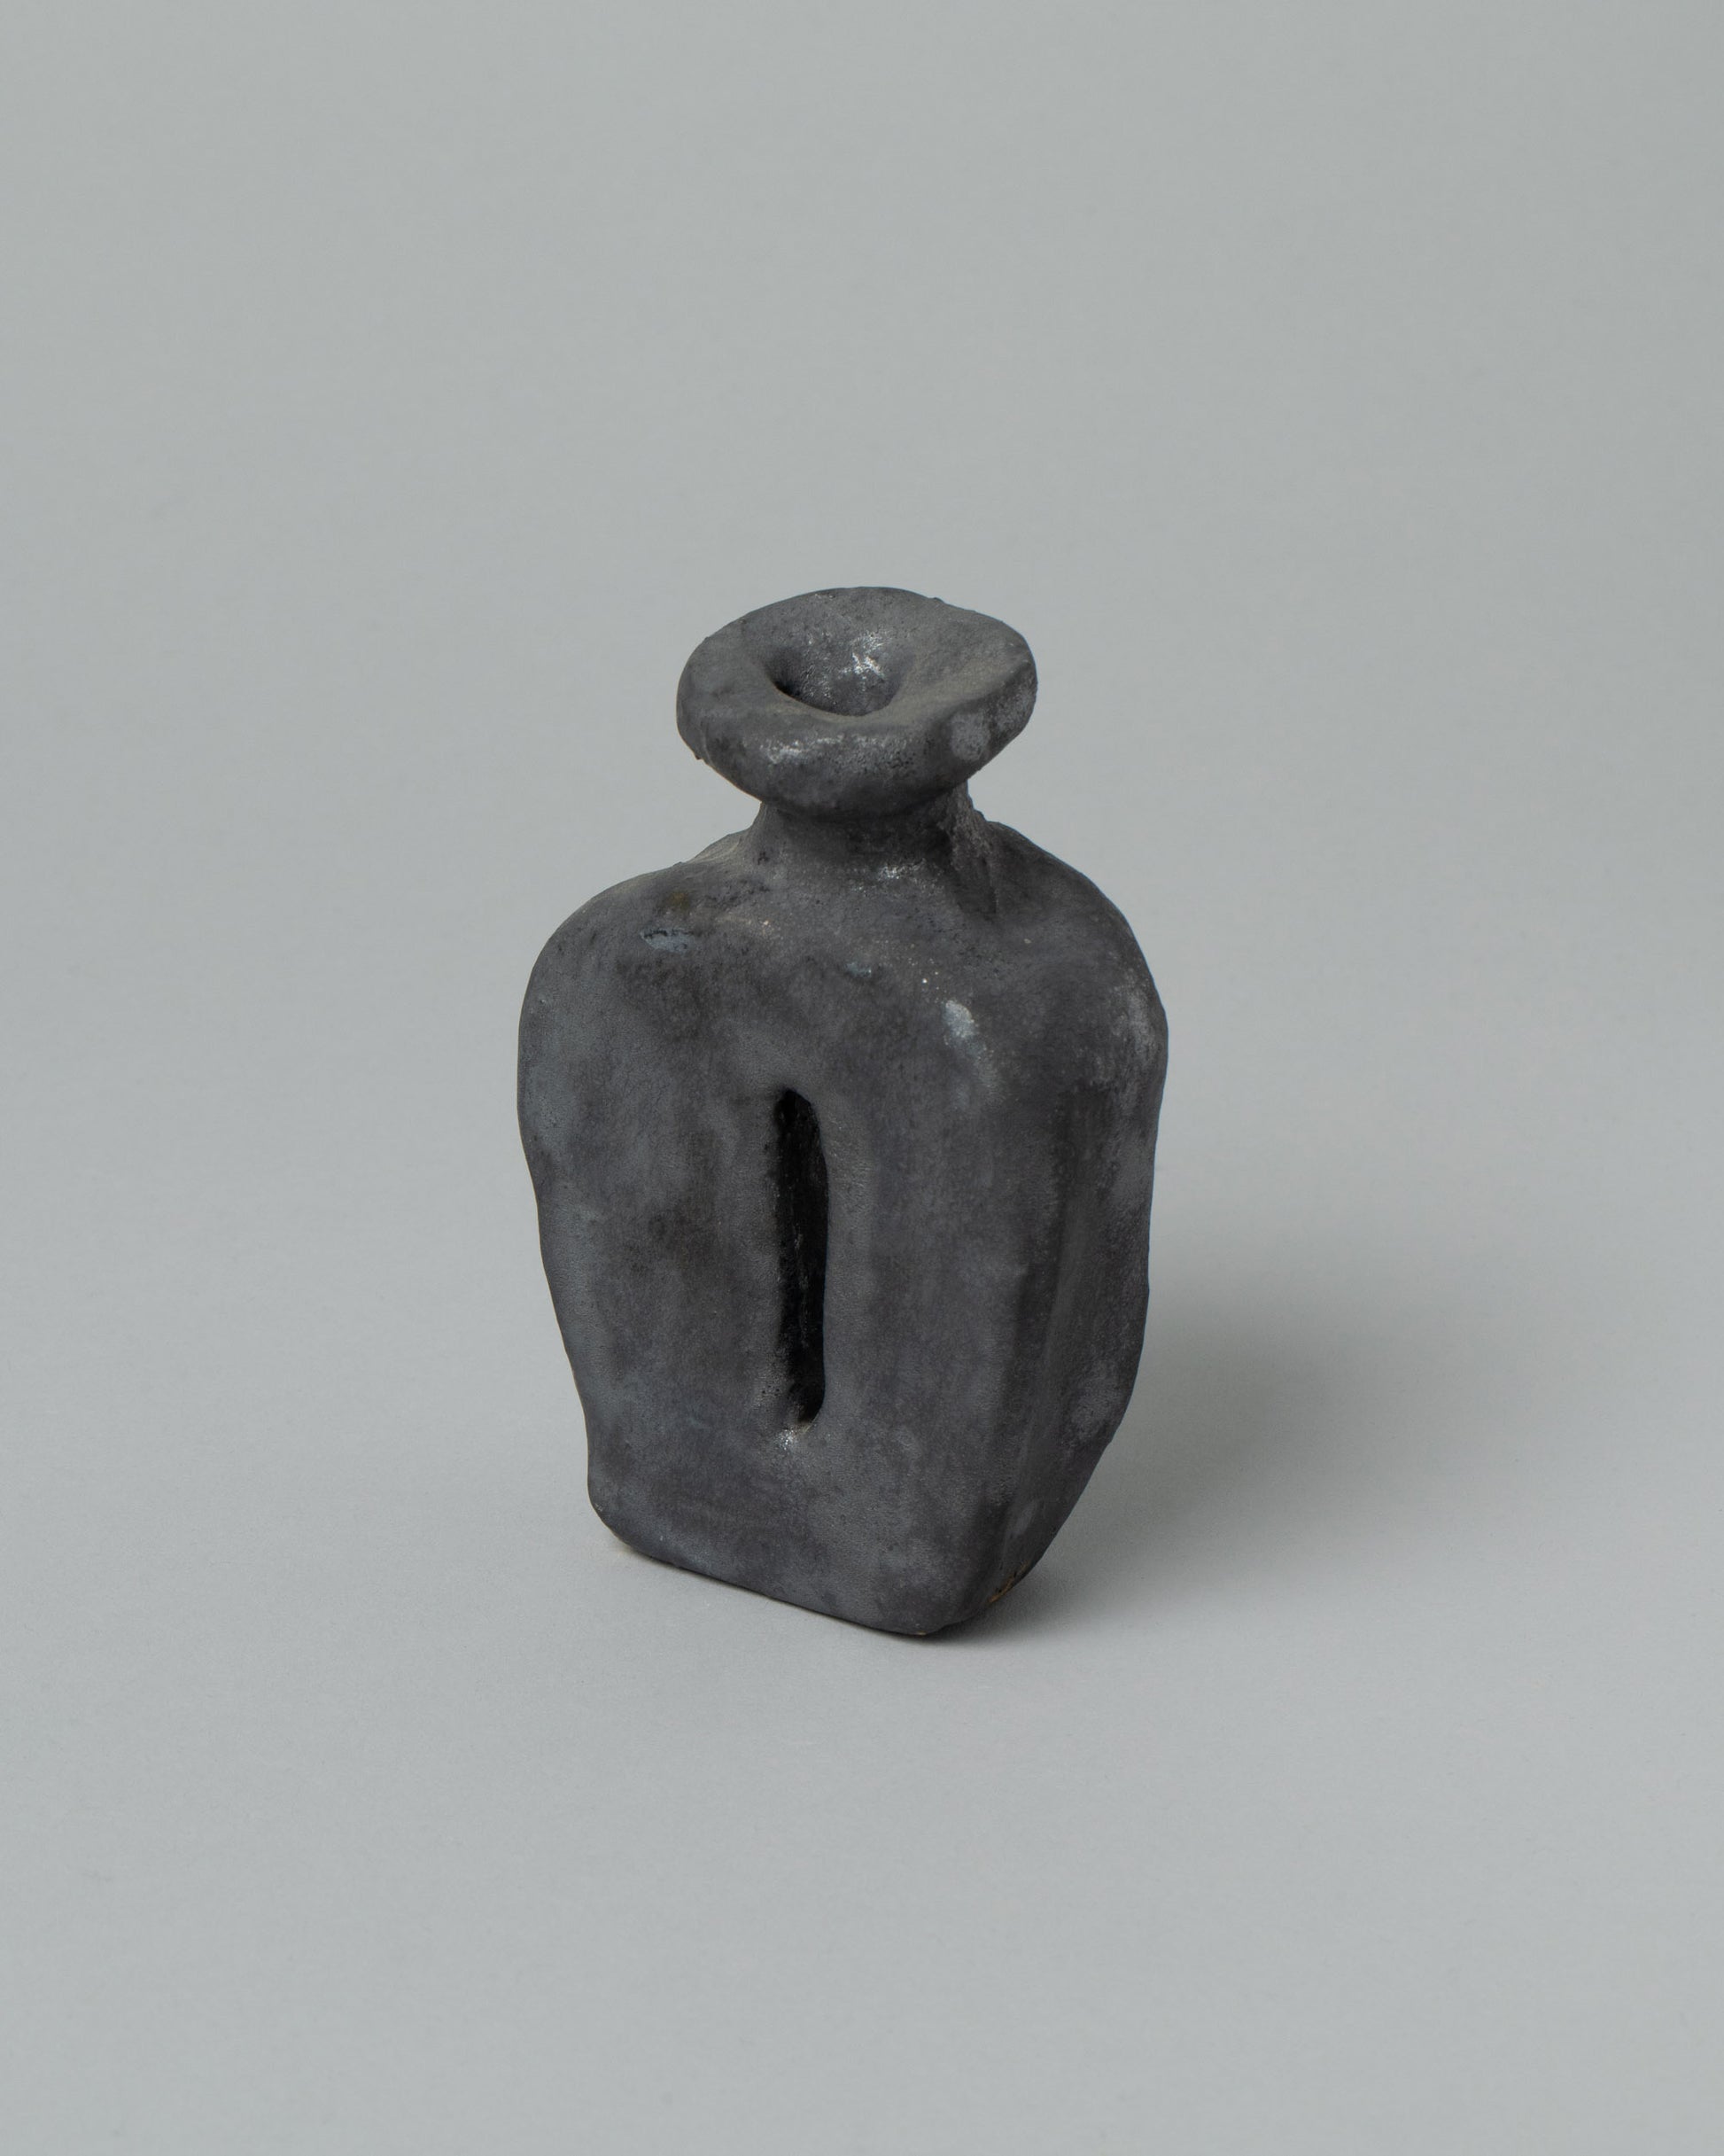 Willem van Hooff Matte Charcoal Extra Small Core Sculpture on light color background.